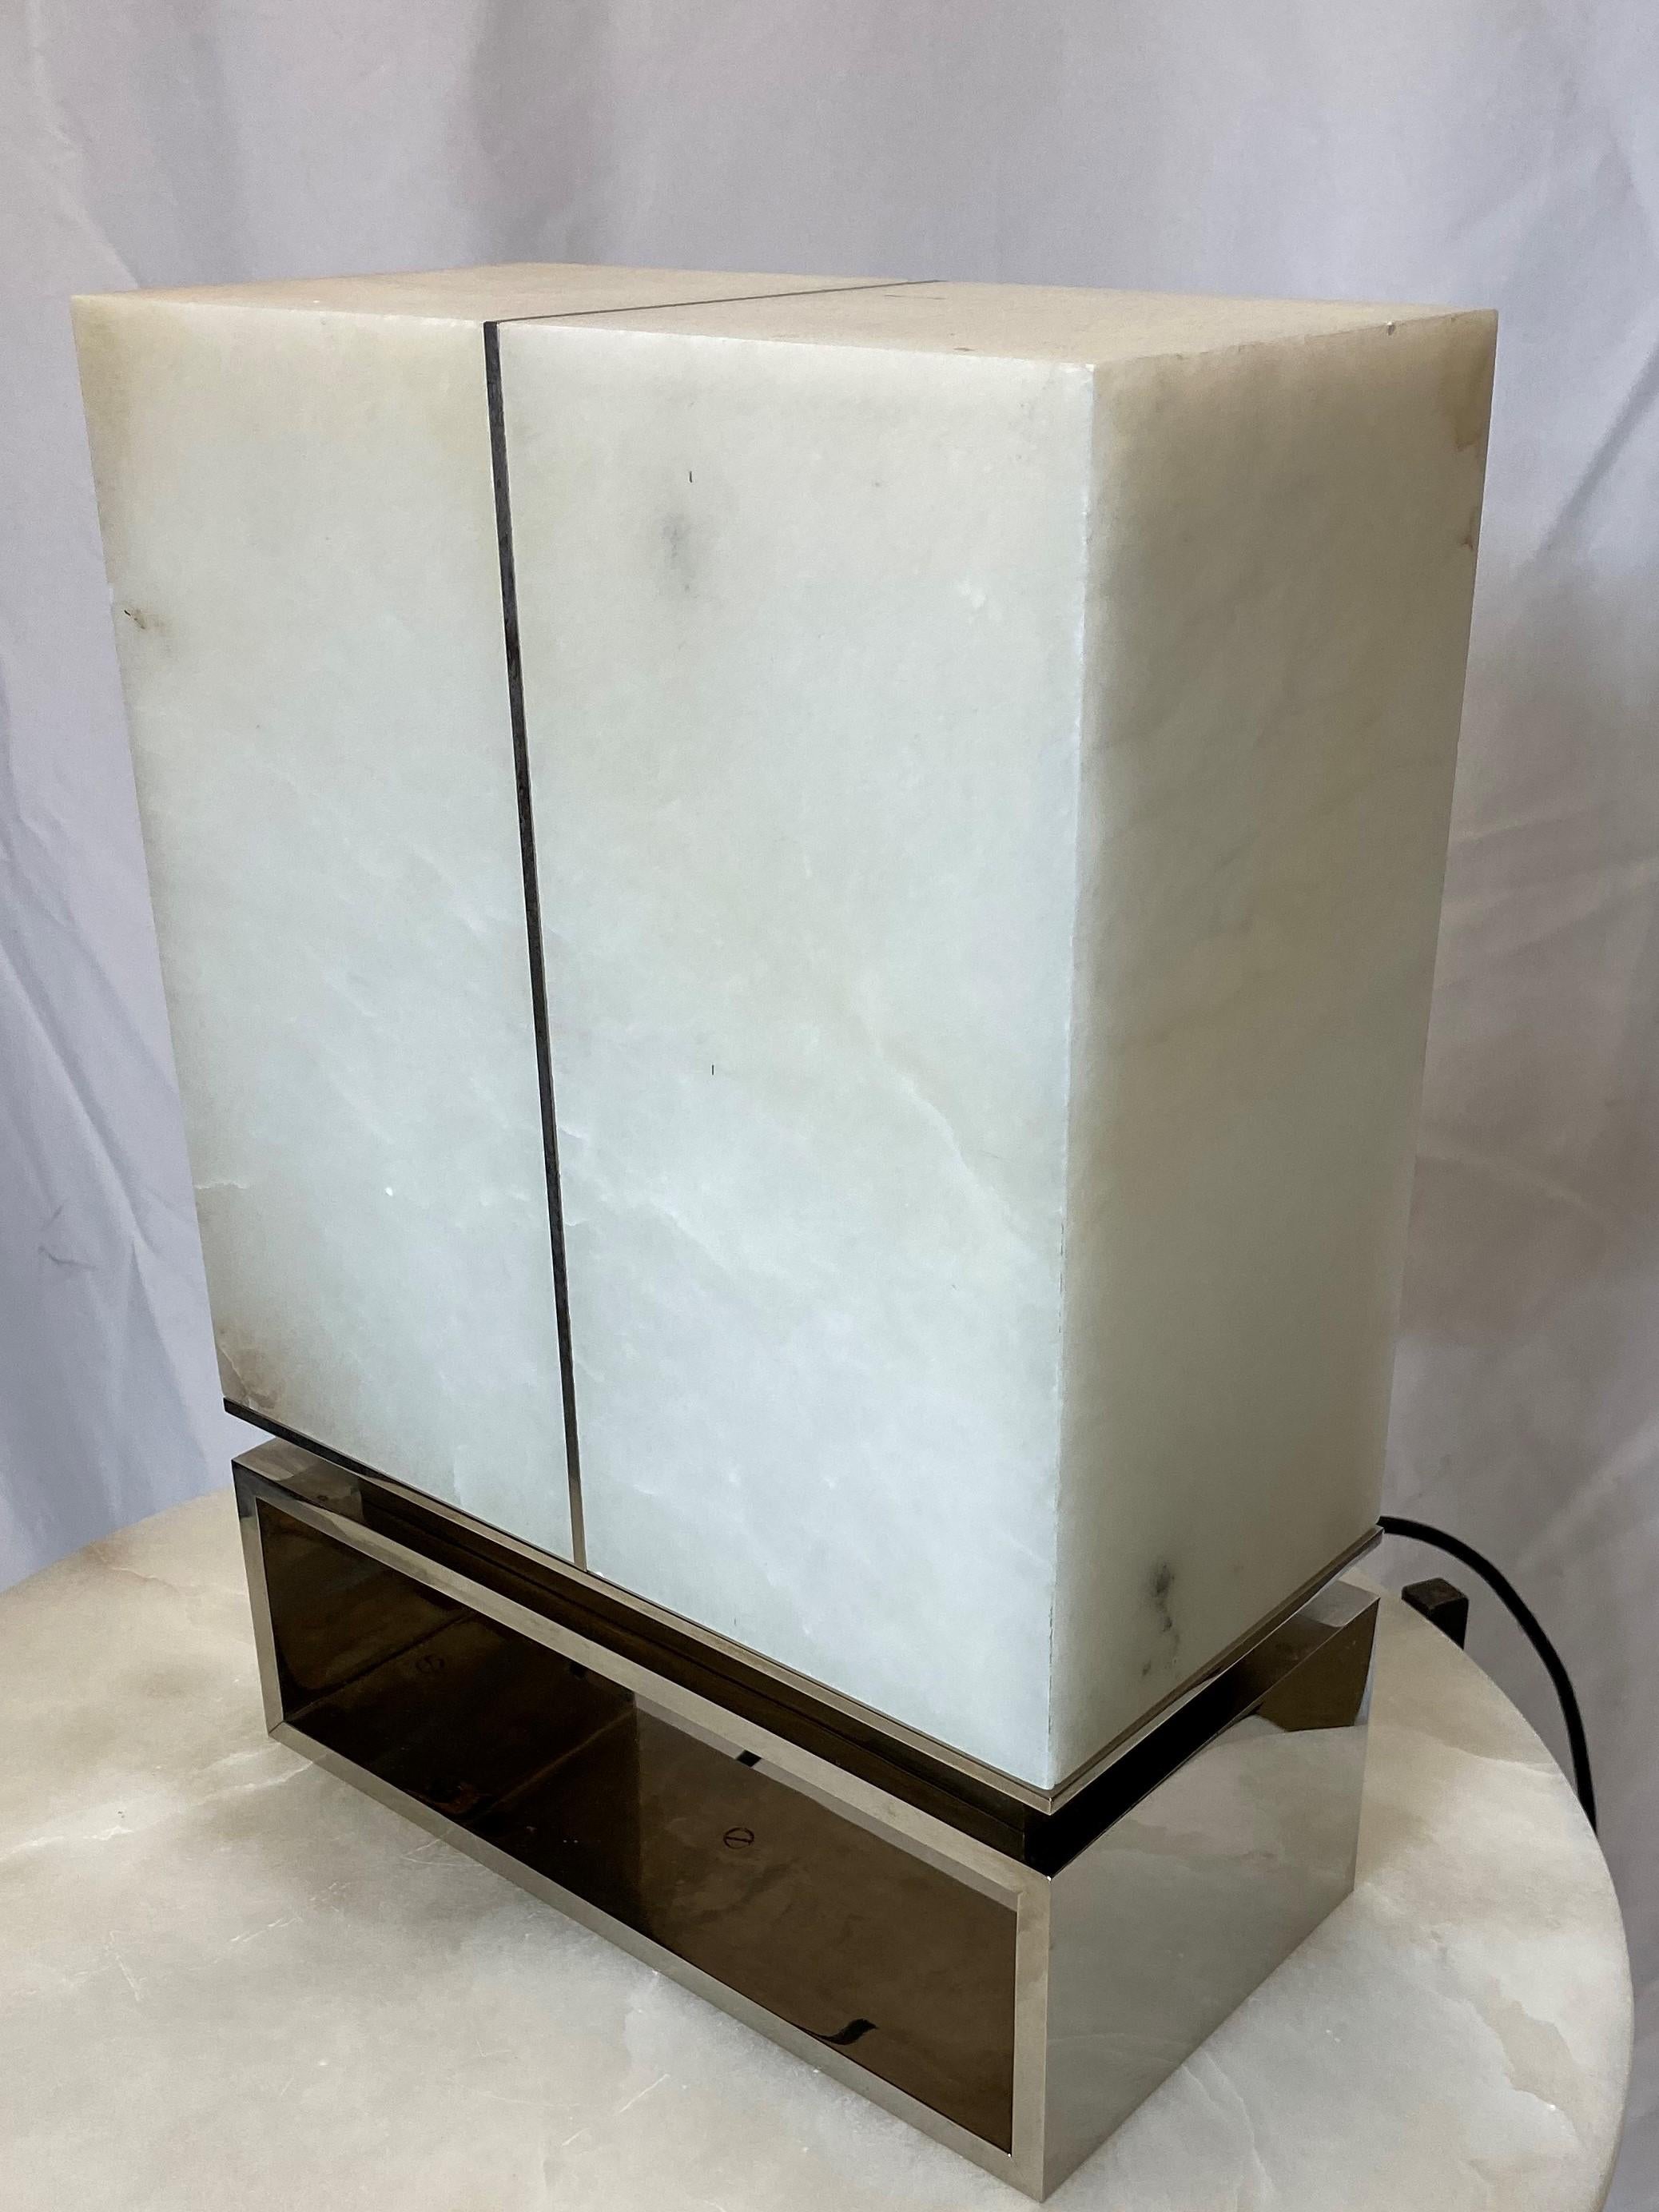 #20075 Maison Baguès alabaster lamp.
Alabaster and brass base.

Various finish possible: polished brass, satin brass, polished nickel, satin nickel, dark patina, black patina (shown on picture here), oil rubbed bronze, gold, 24k nitrate gold...

UL